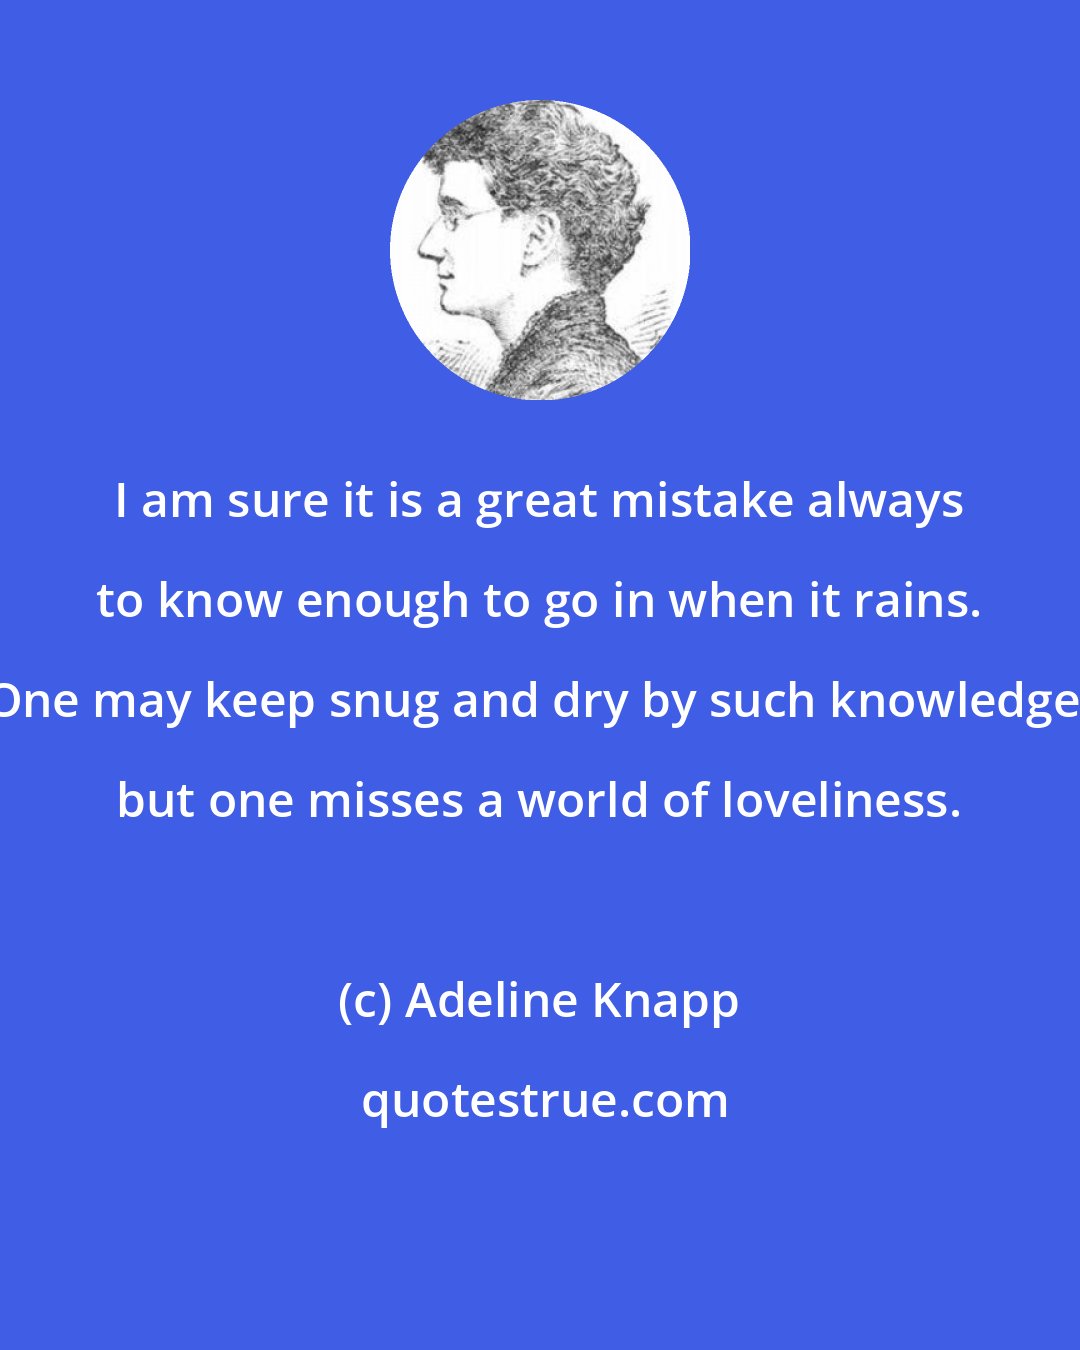 Adeline Knapp: I am sure it is a great mistake always to know enough to go in when it rains. One may keep snug and dry by such knowledge, but one misses a world of loveliness.